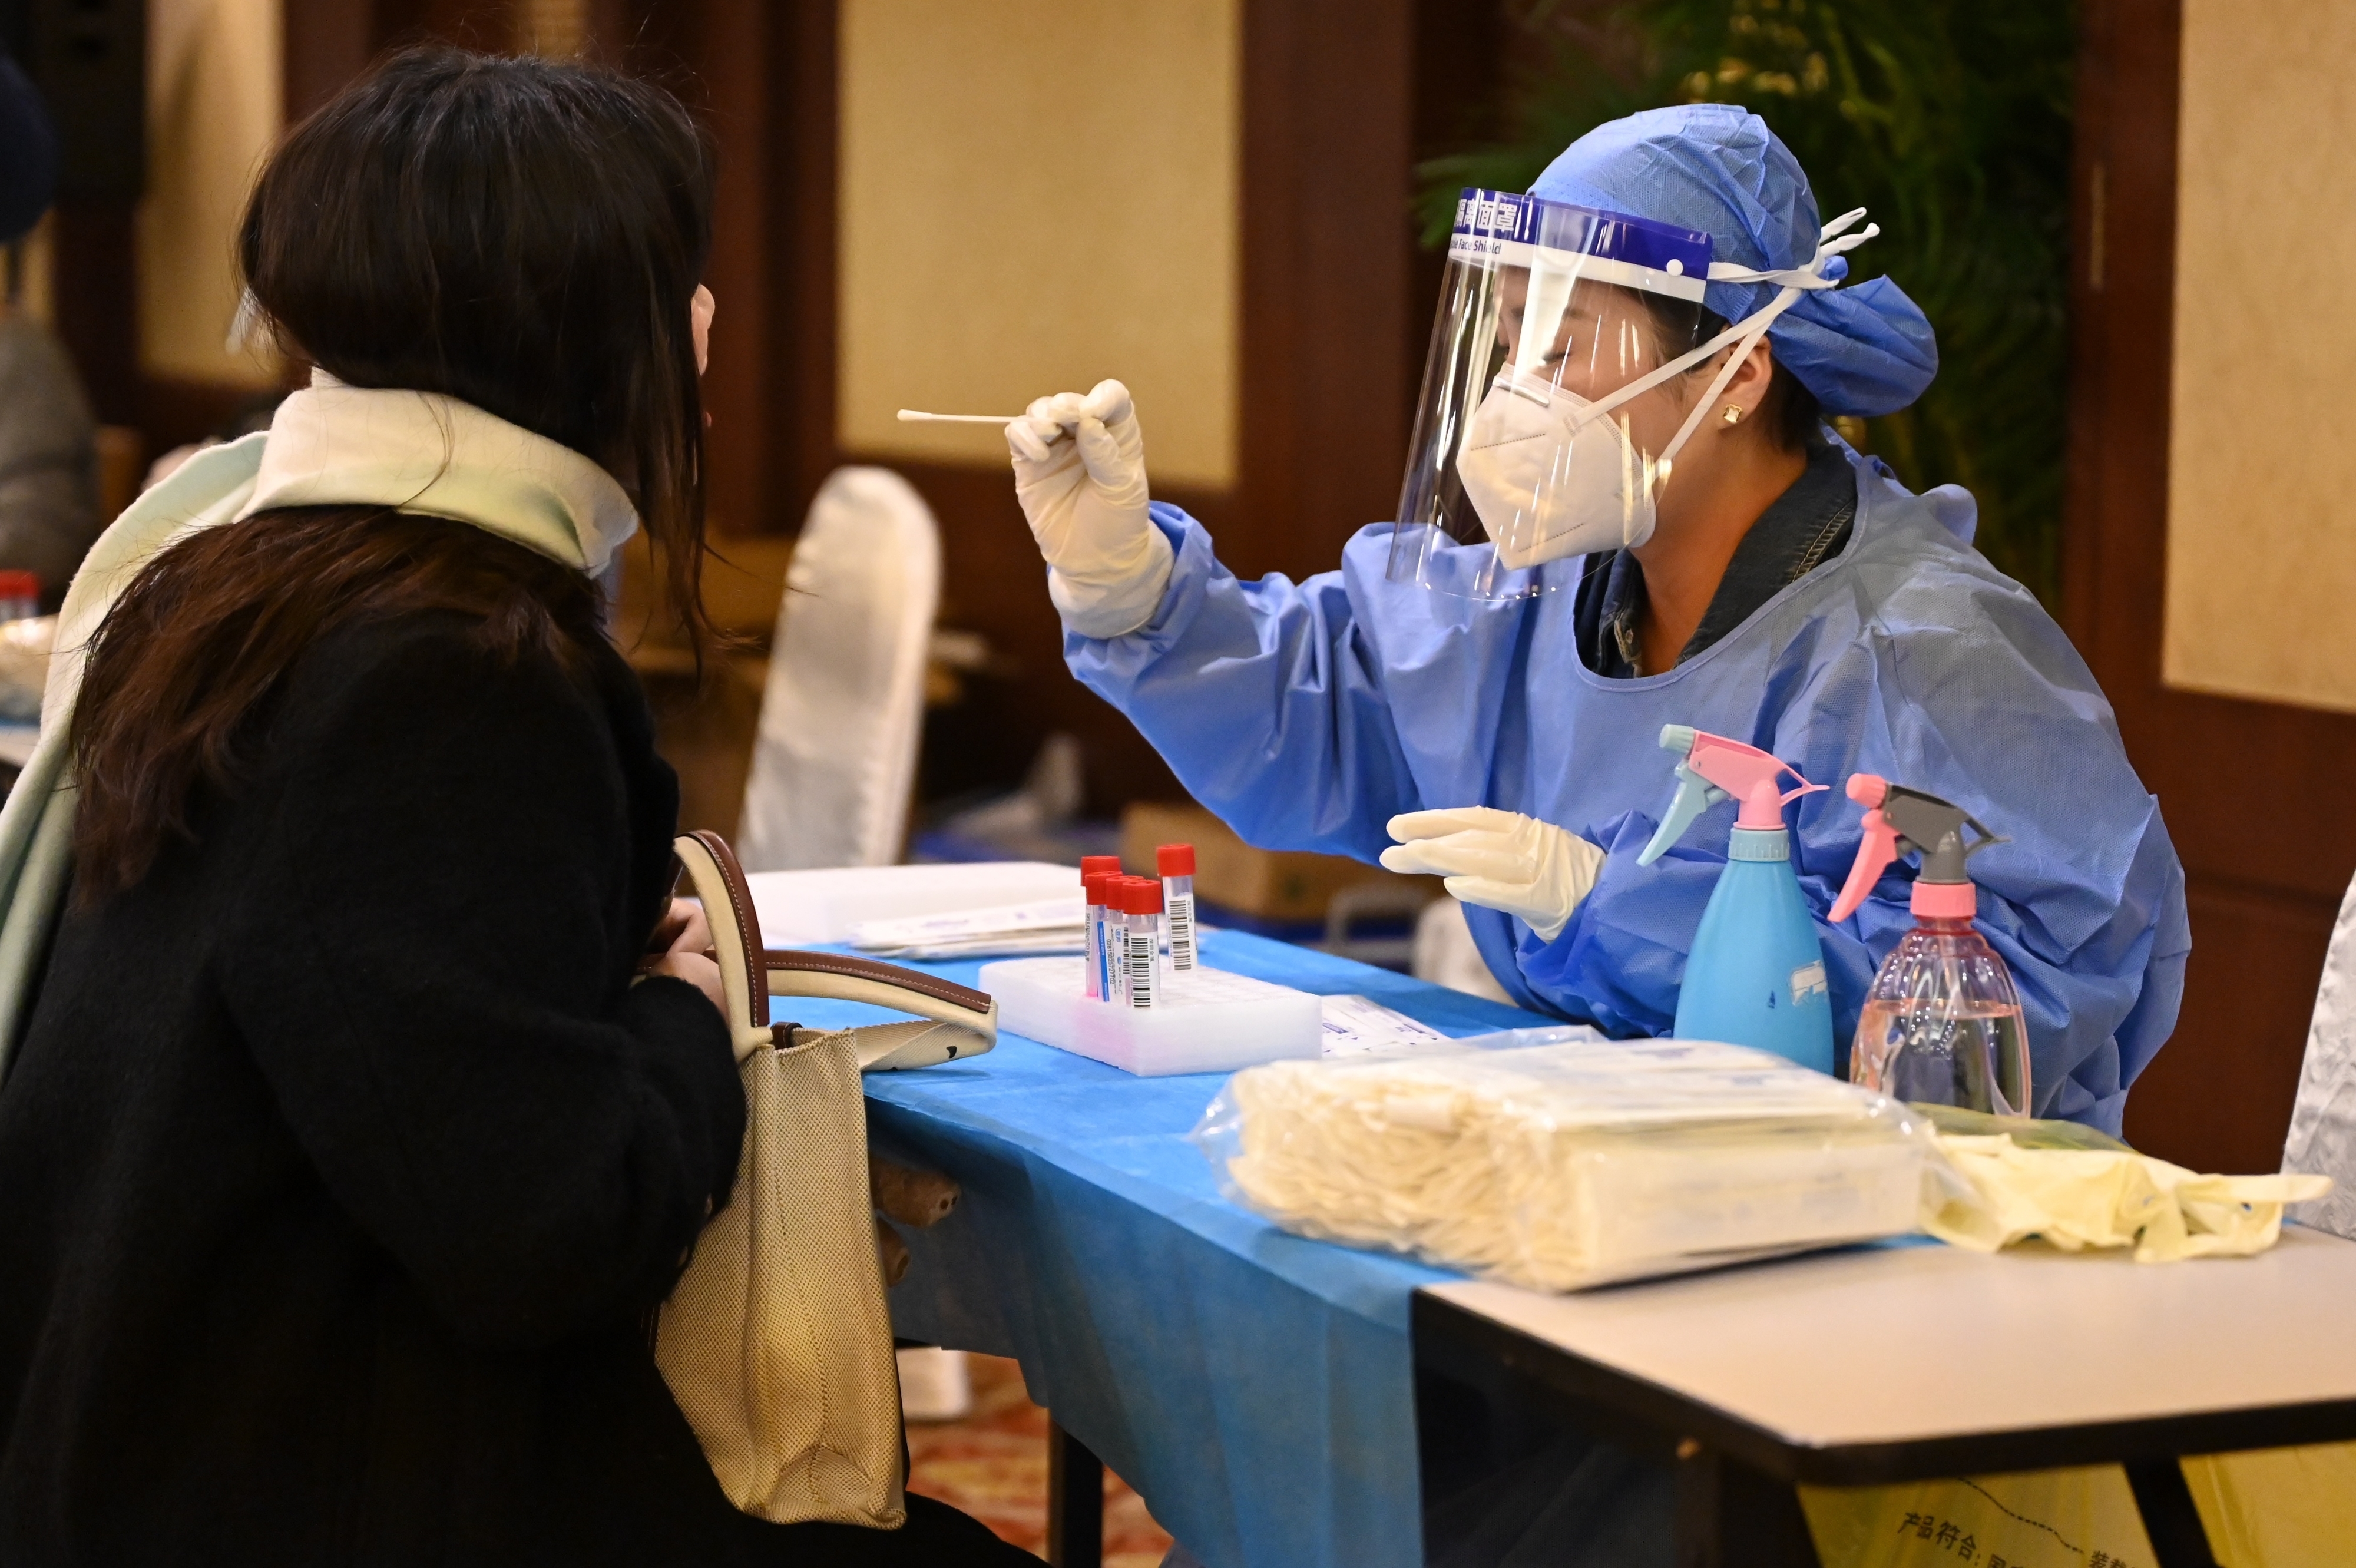 Health professional in PPE administering a nasal swab test to a person